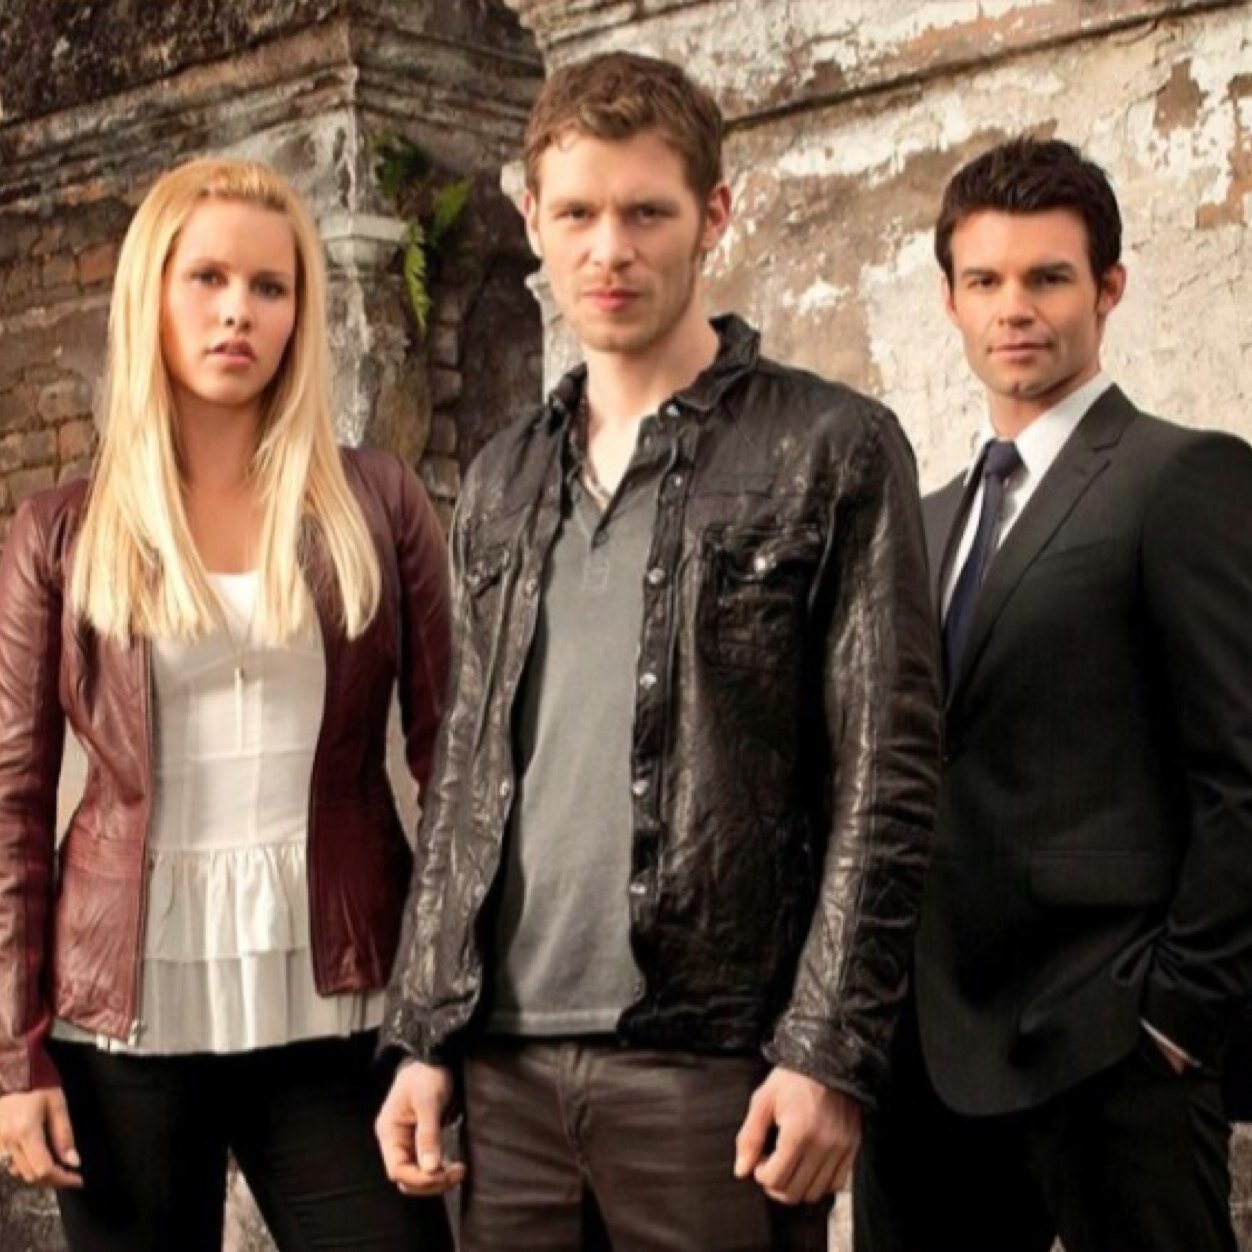 Here do you get everything you need to know about the show called The Originals and it’s lovely actors! #TheOriginals